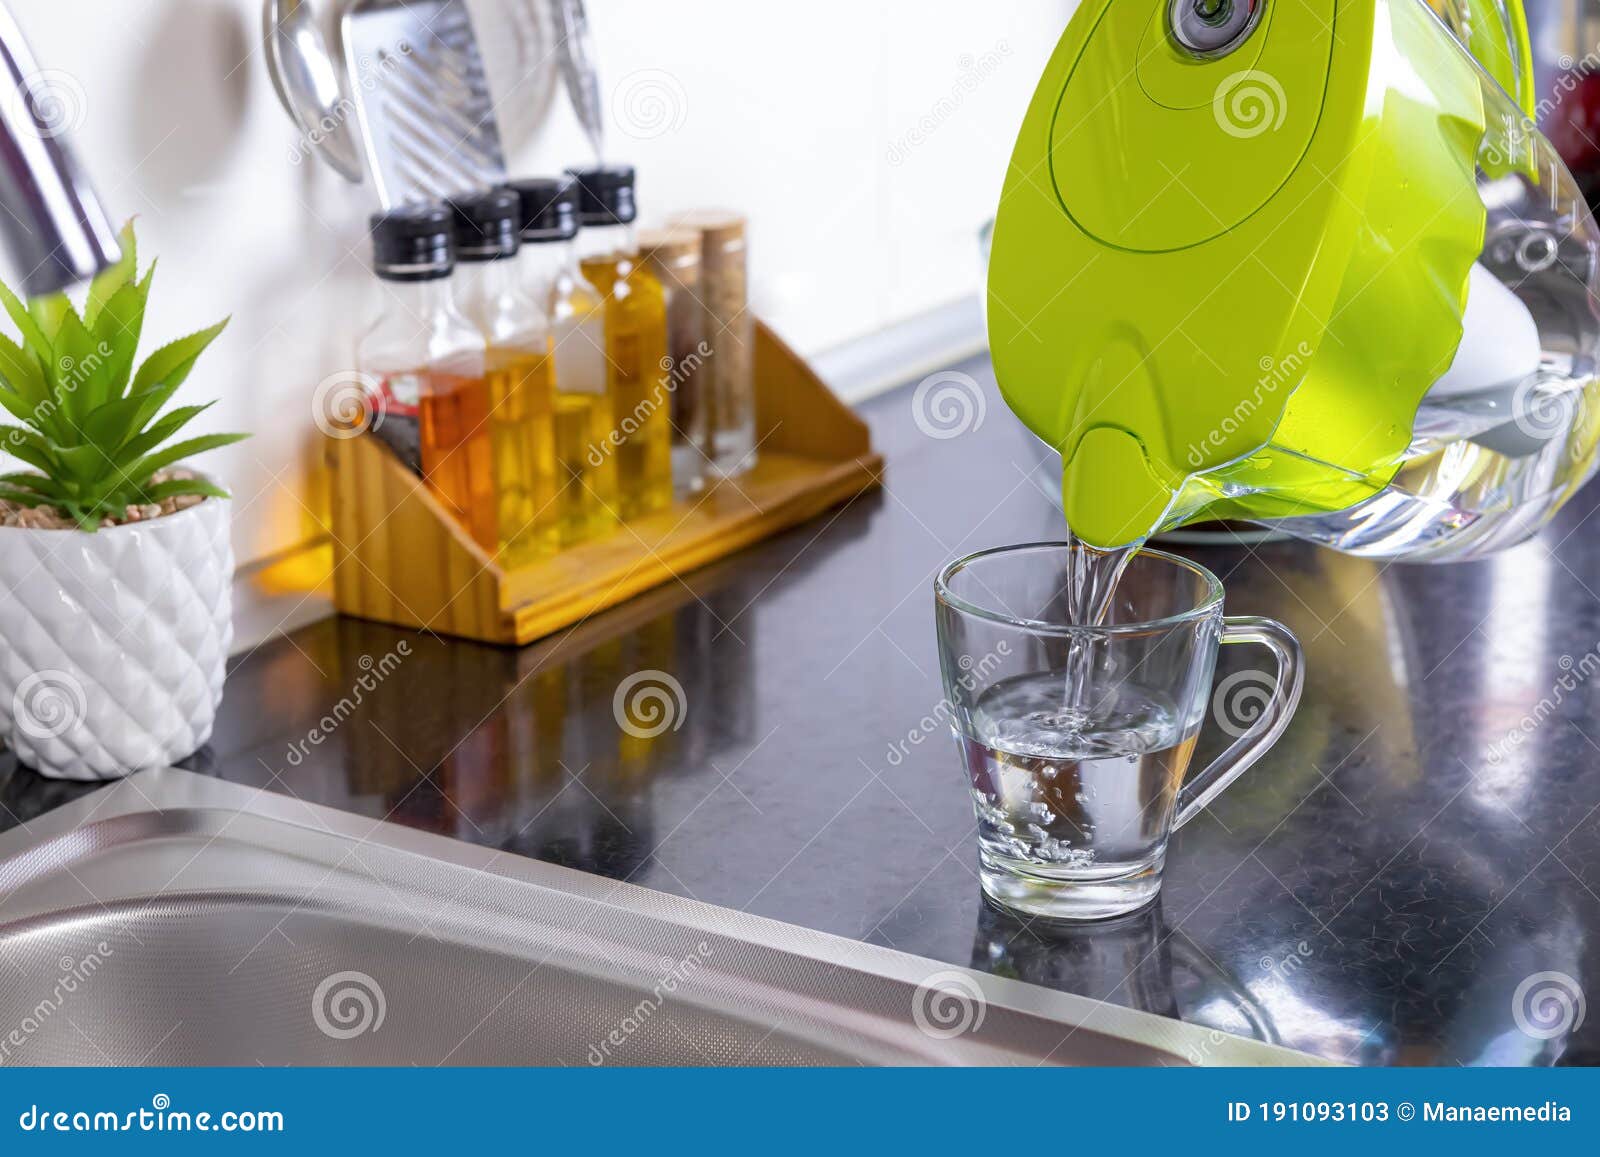 pouring filtered water into glass from jug in the kitchen